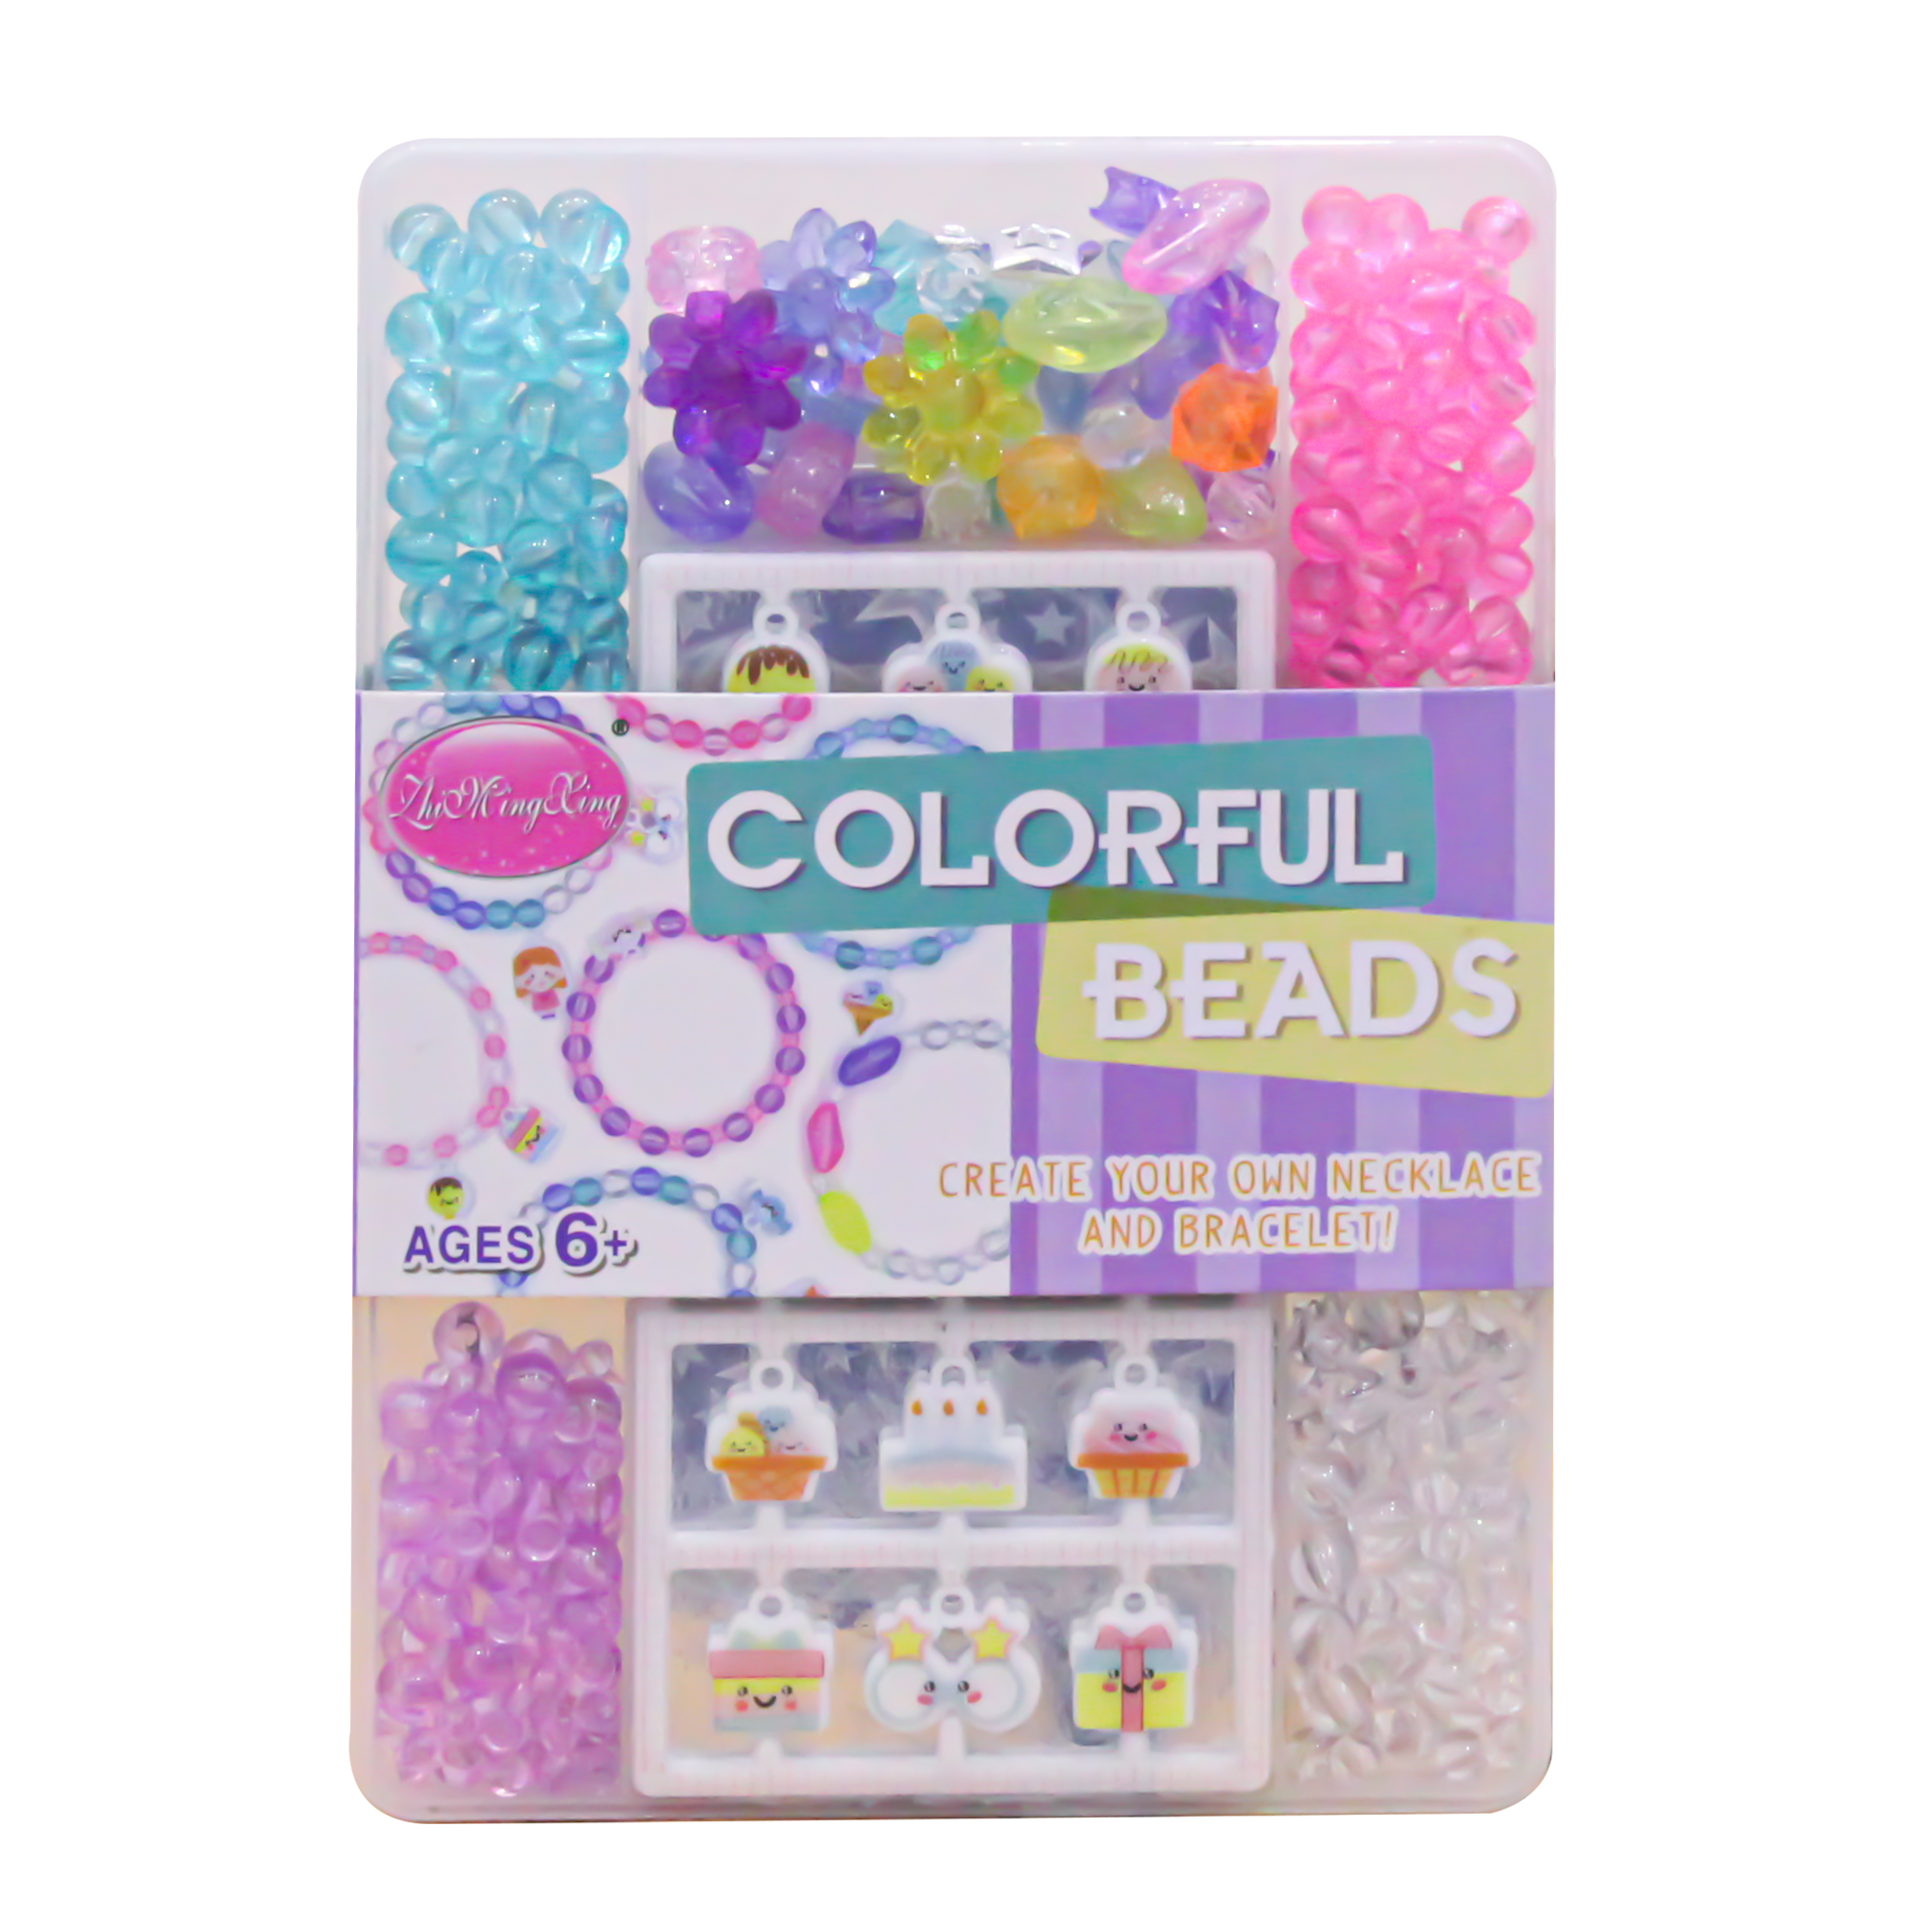 Colorful Beads to create your own Necklace and Bracelet! (Style may vary )